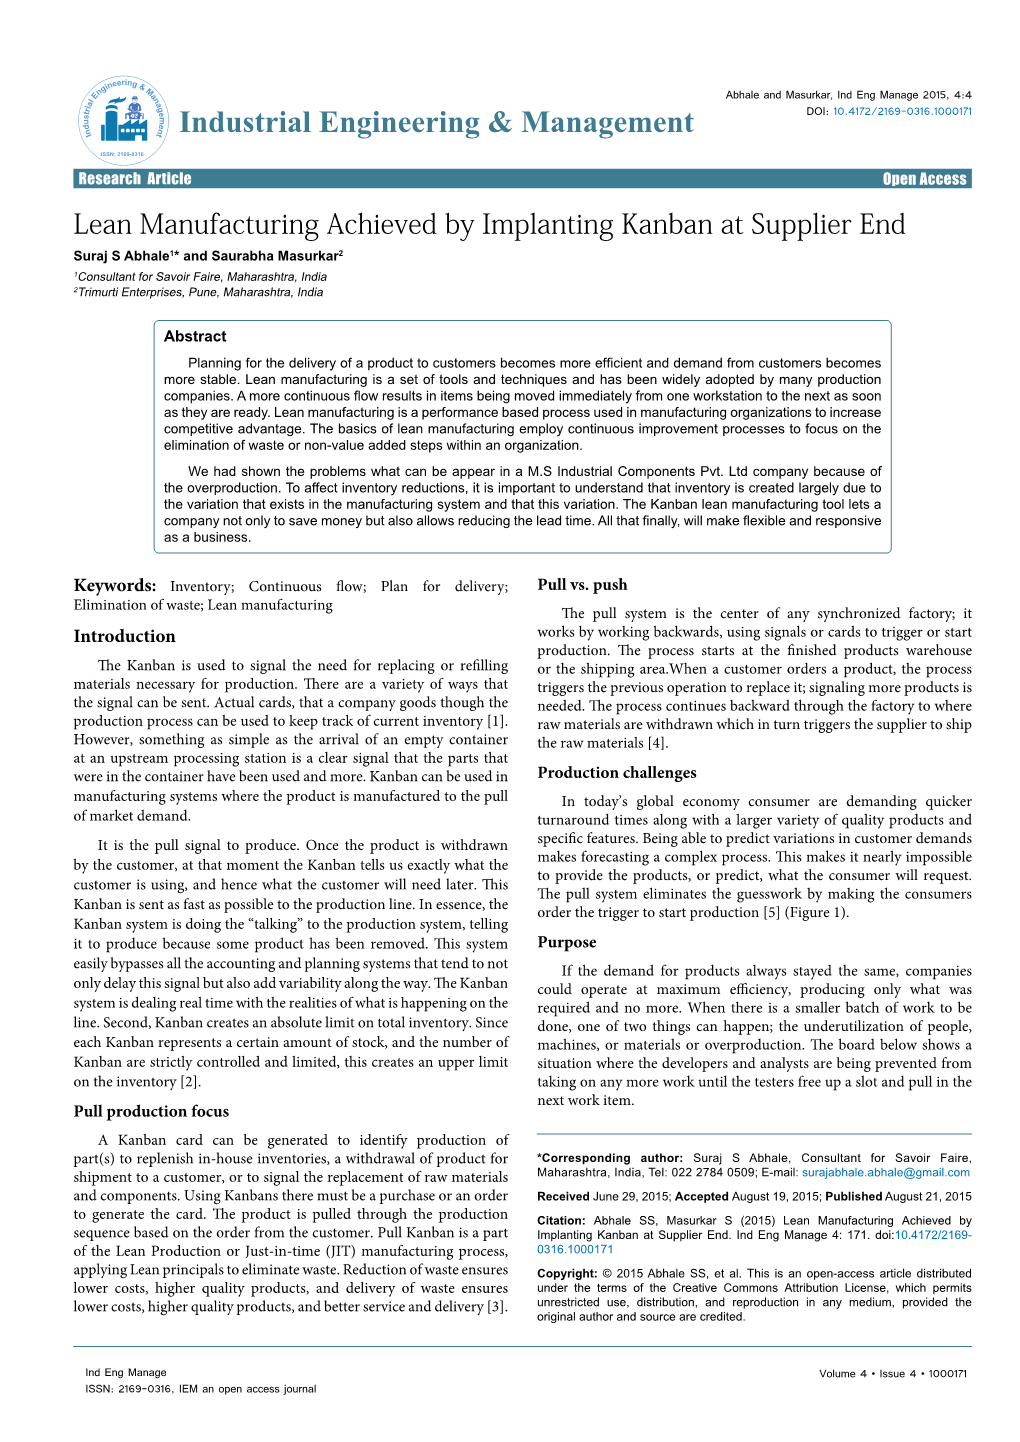 Lean Manufacturing Achieved by Implanting Kanban at Supplier